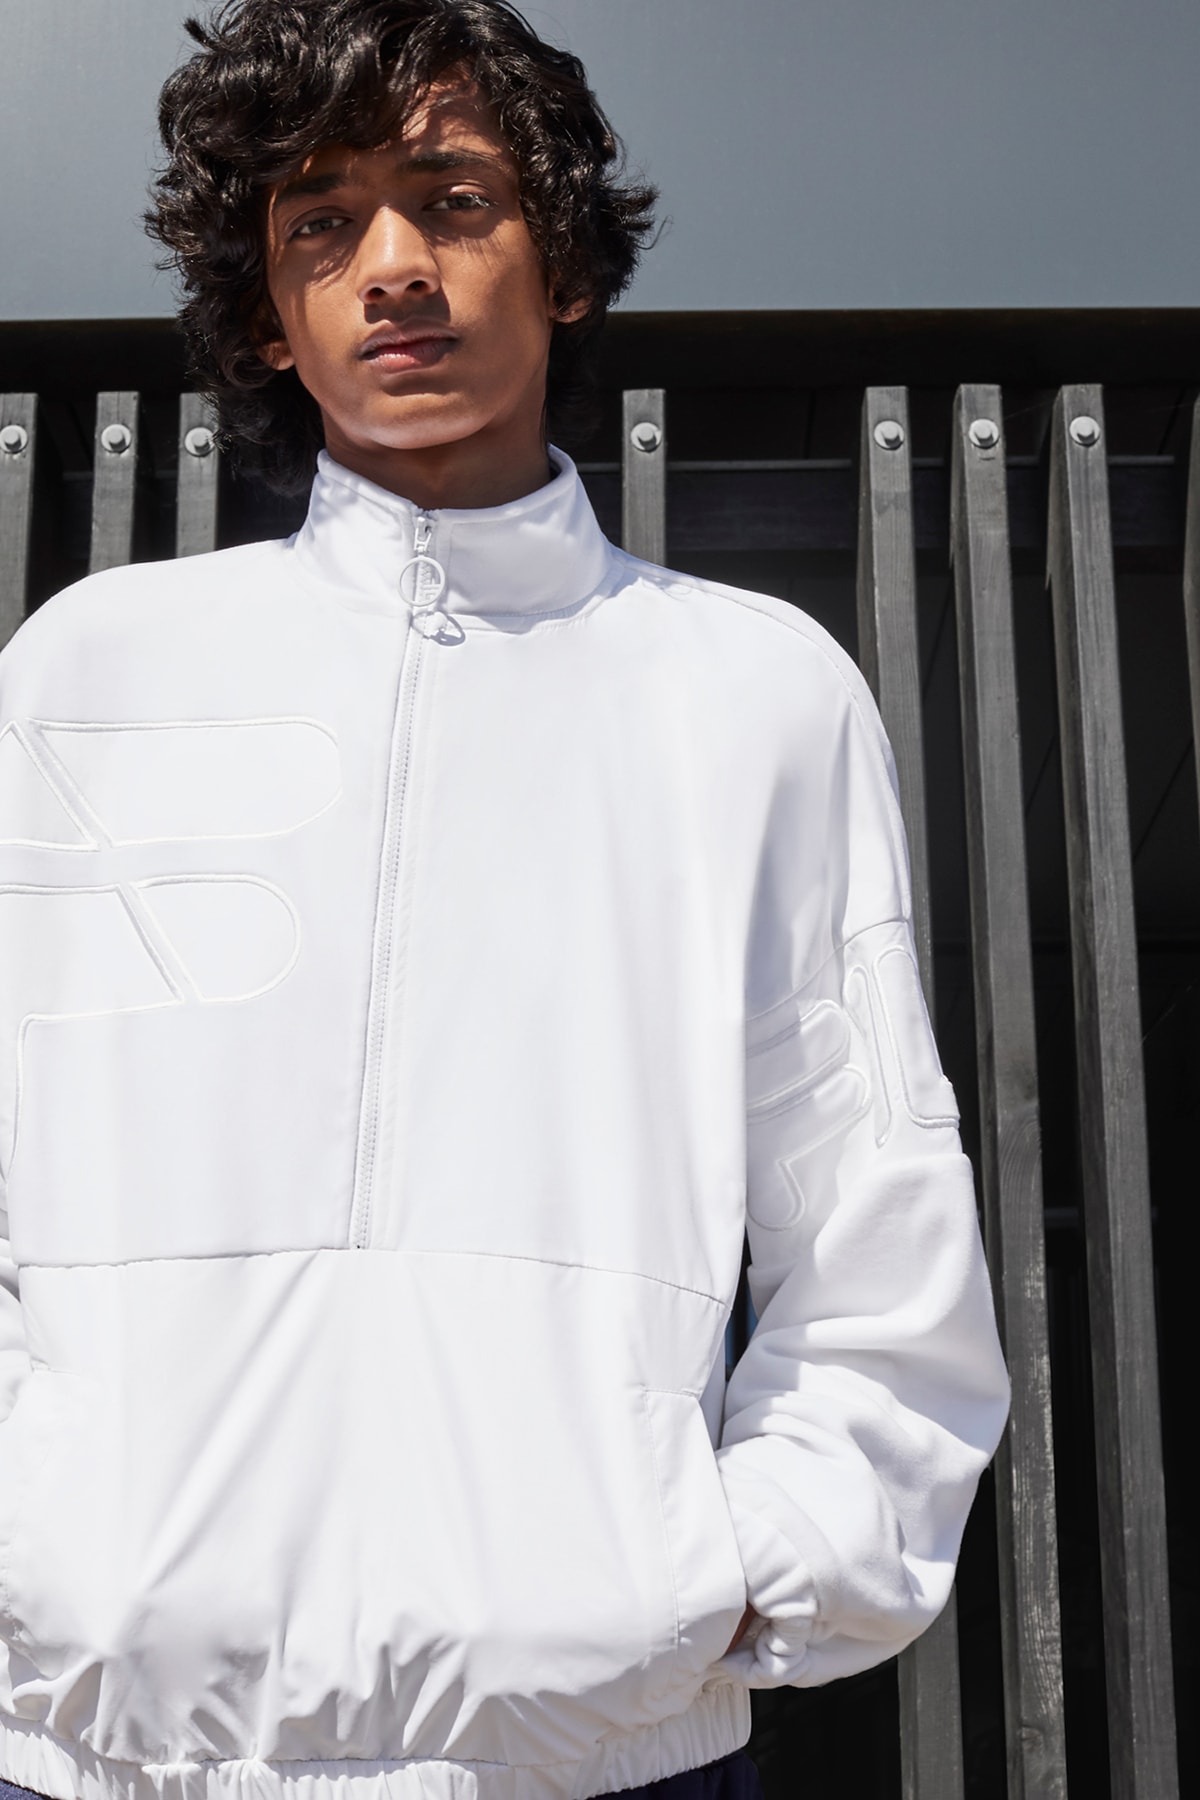 fila fall winter 2018 fw18 heritage collection archive football tracksuits